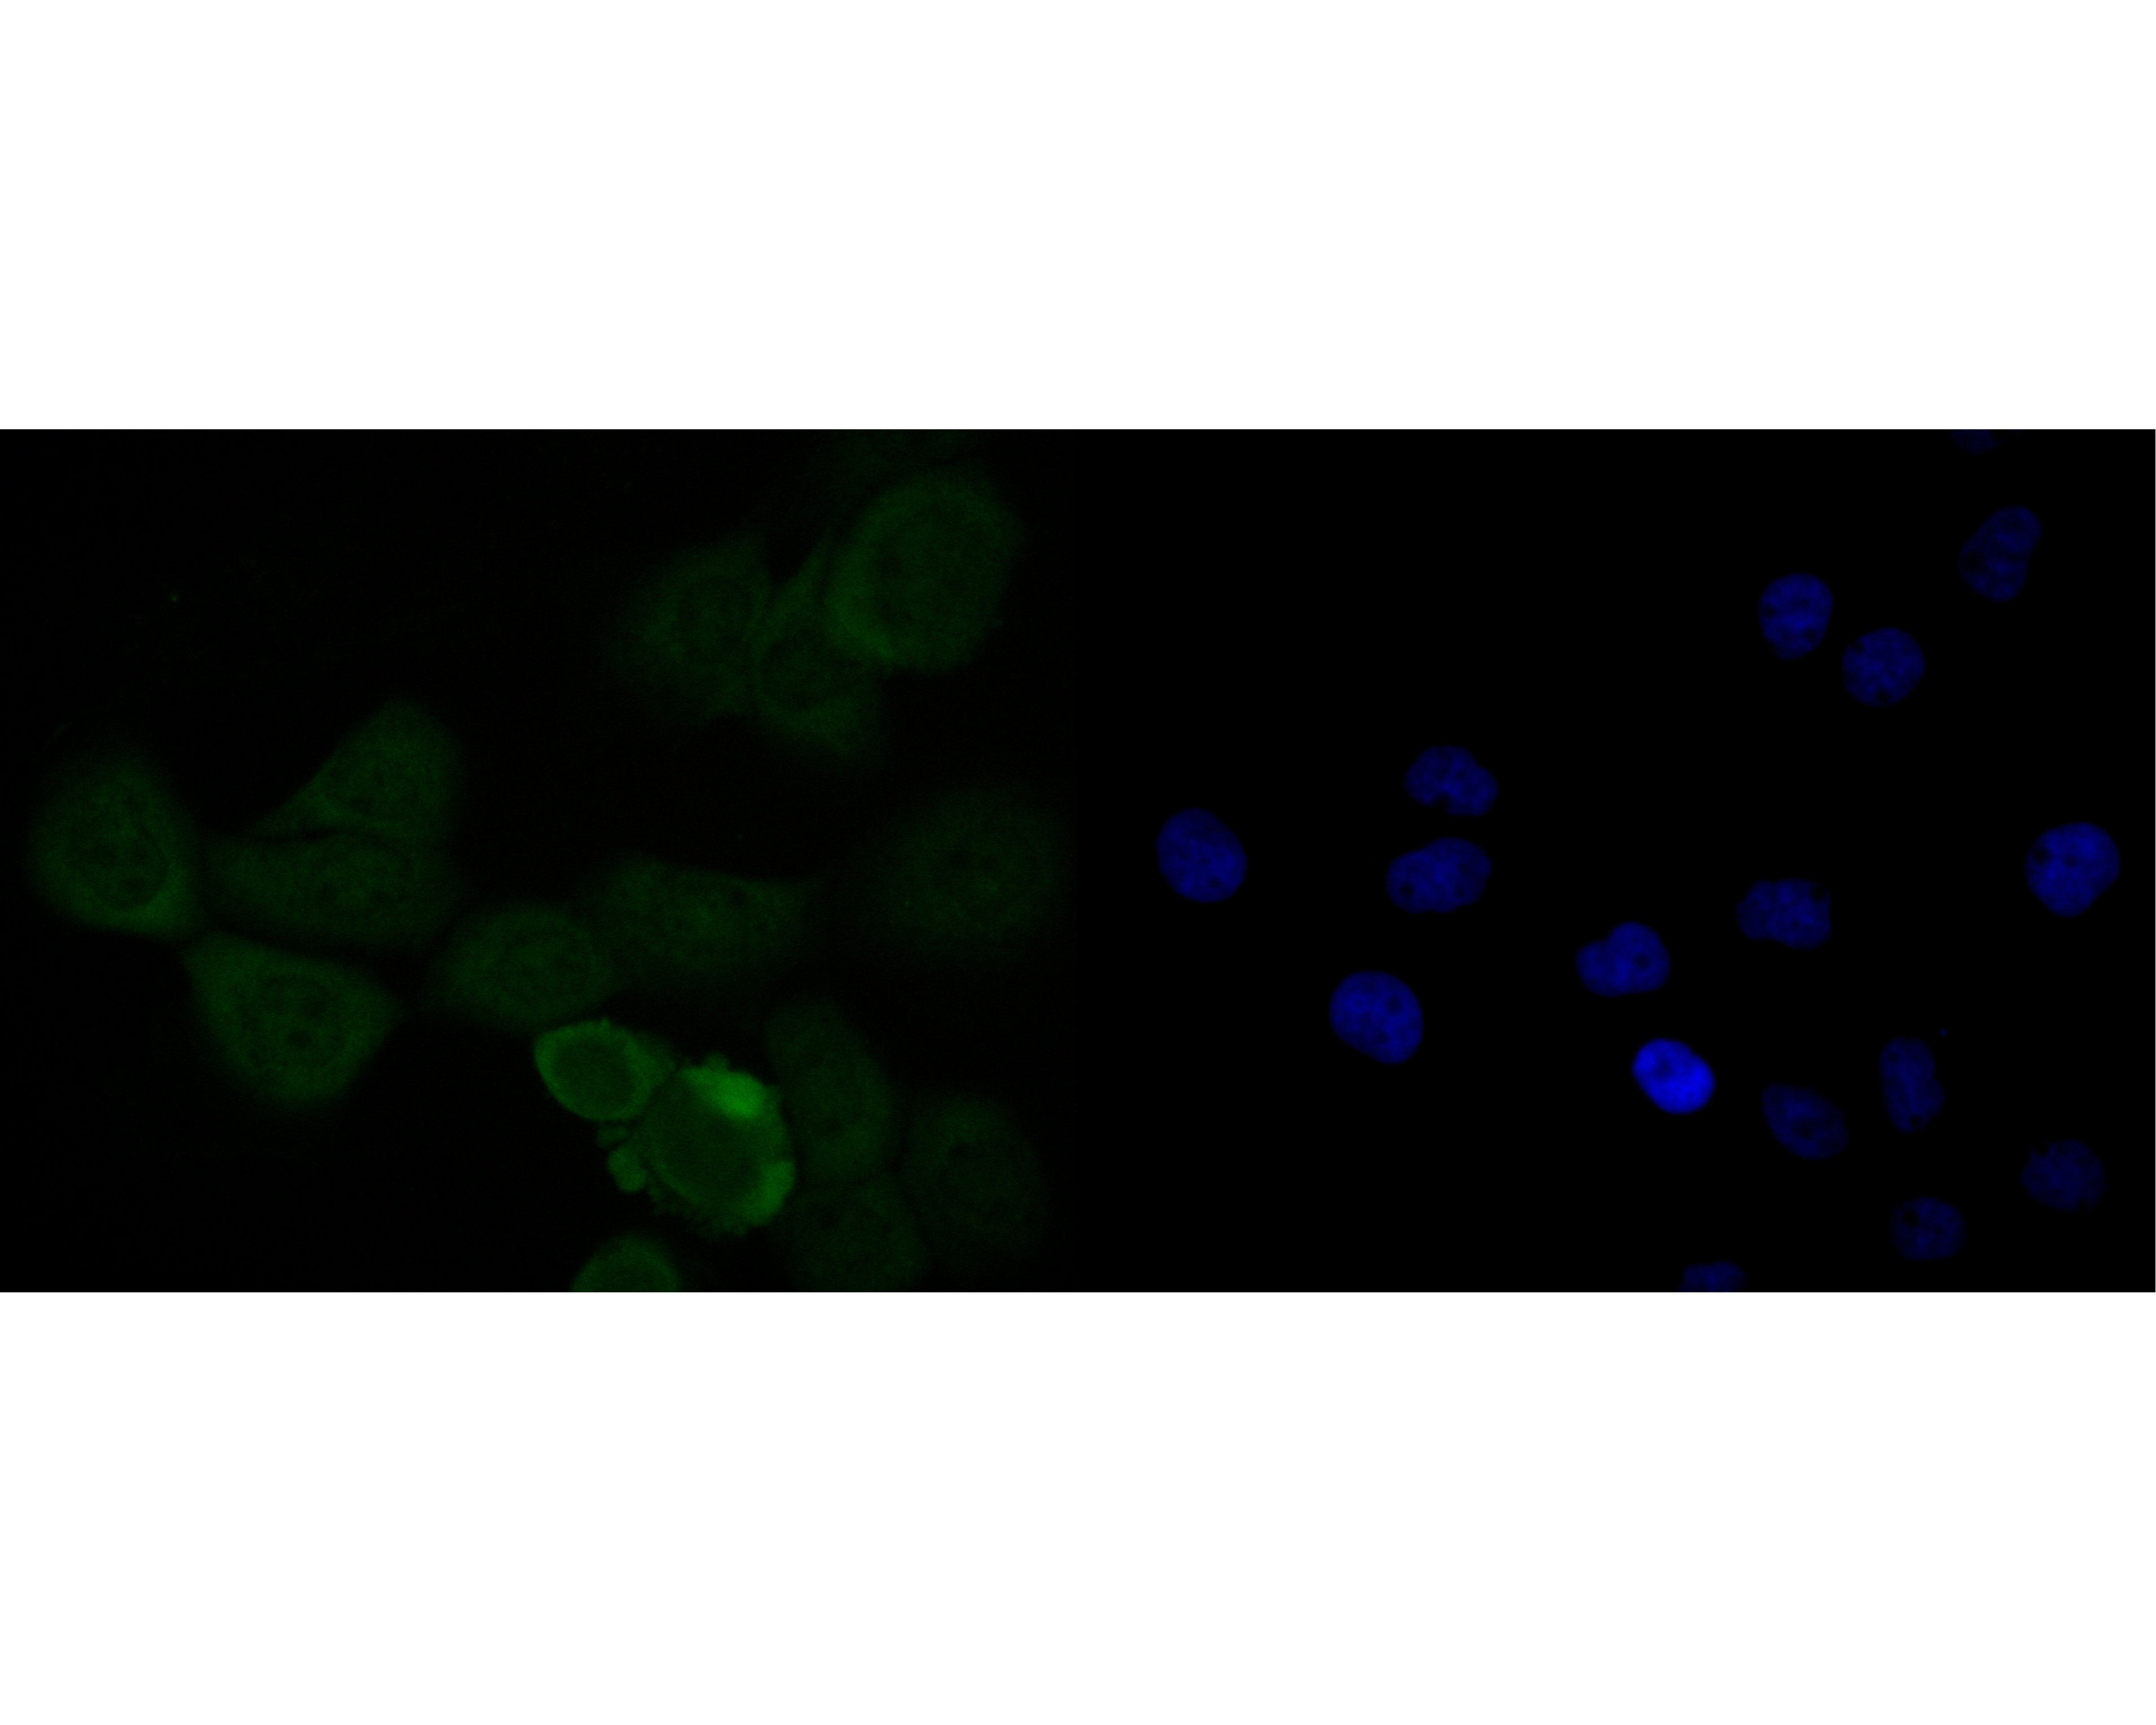 ICC staining of HMGB2 in A431 cells (green). Formalin fixed cells were permeabilized with 0.1% Triton X-100 in TBS for 10 minutes at room temperature and blocked with 1% Blocker BSA for 15 minutes at room temperature. Cells were probed with the primary antibody (EM1902-06, 1/50) for 1 hour at room temperature, washed with PBS. Alexa Fluor®488 Goat anti-Mouse IgG was used as the secondary antibody at 1/1,000 dilution. The nuclear counter stain is DAPI (blue).